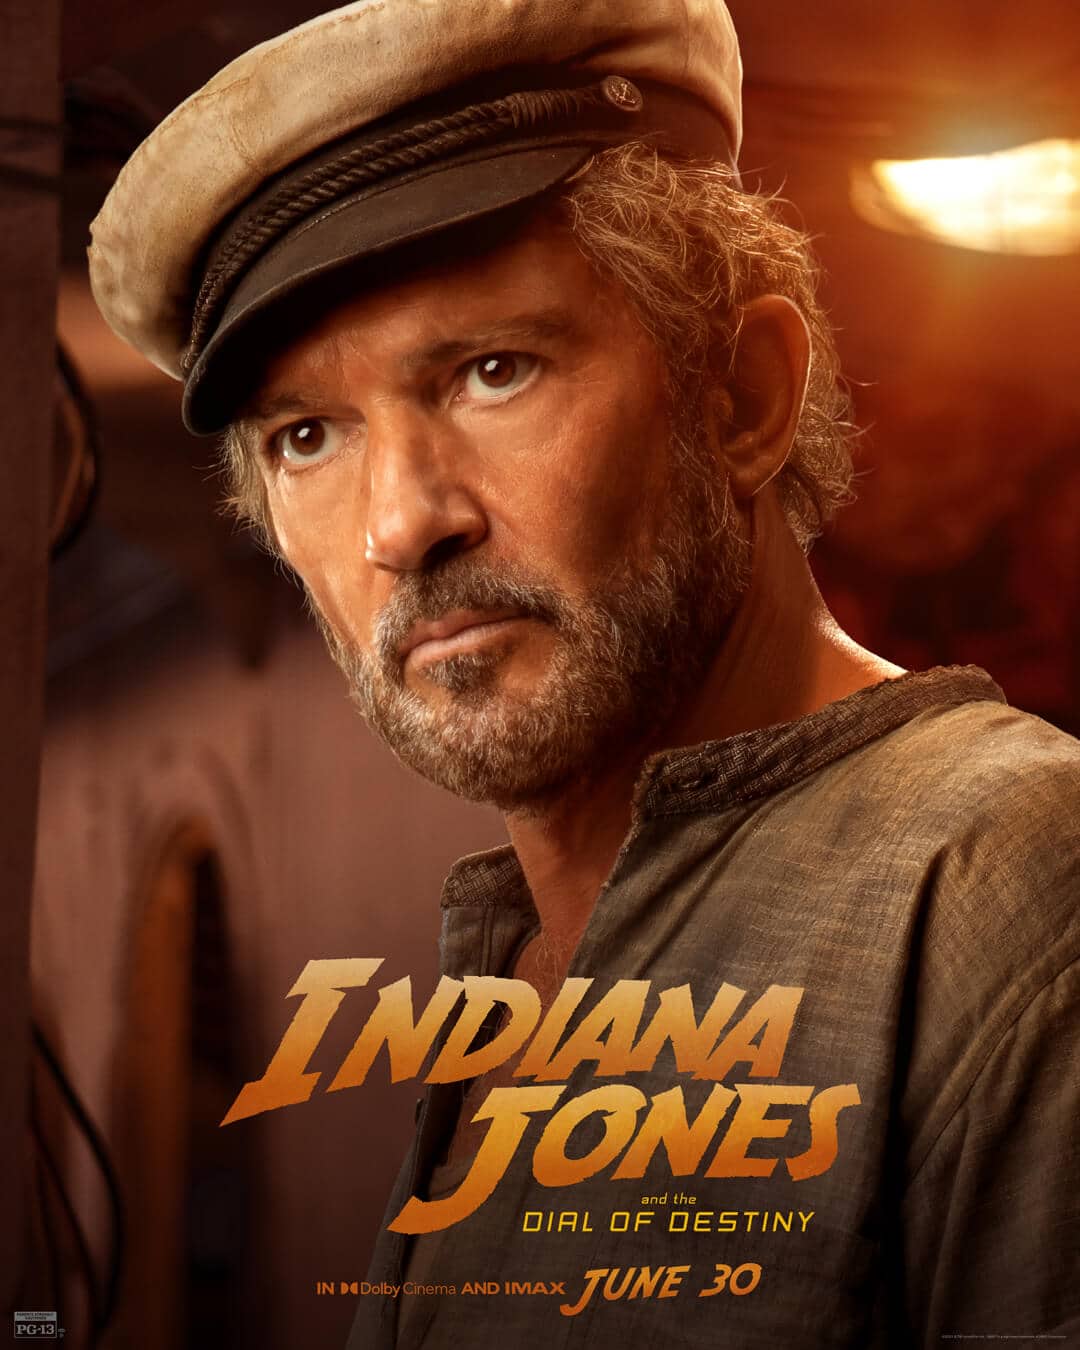 “Indiana Jones And The Dial Of Destiny” Character Posters Released